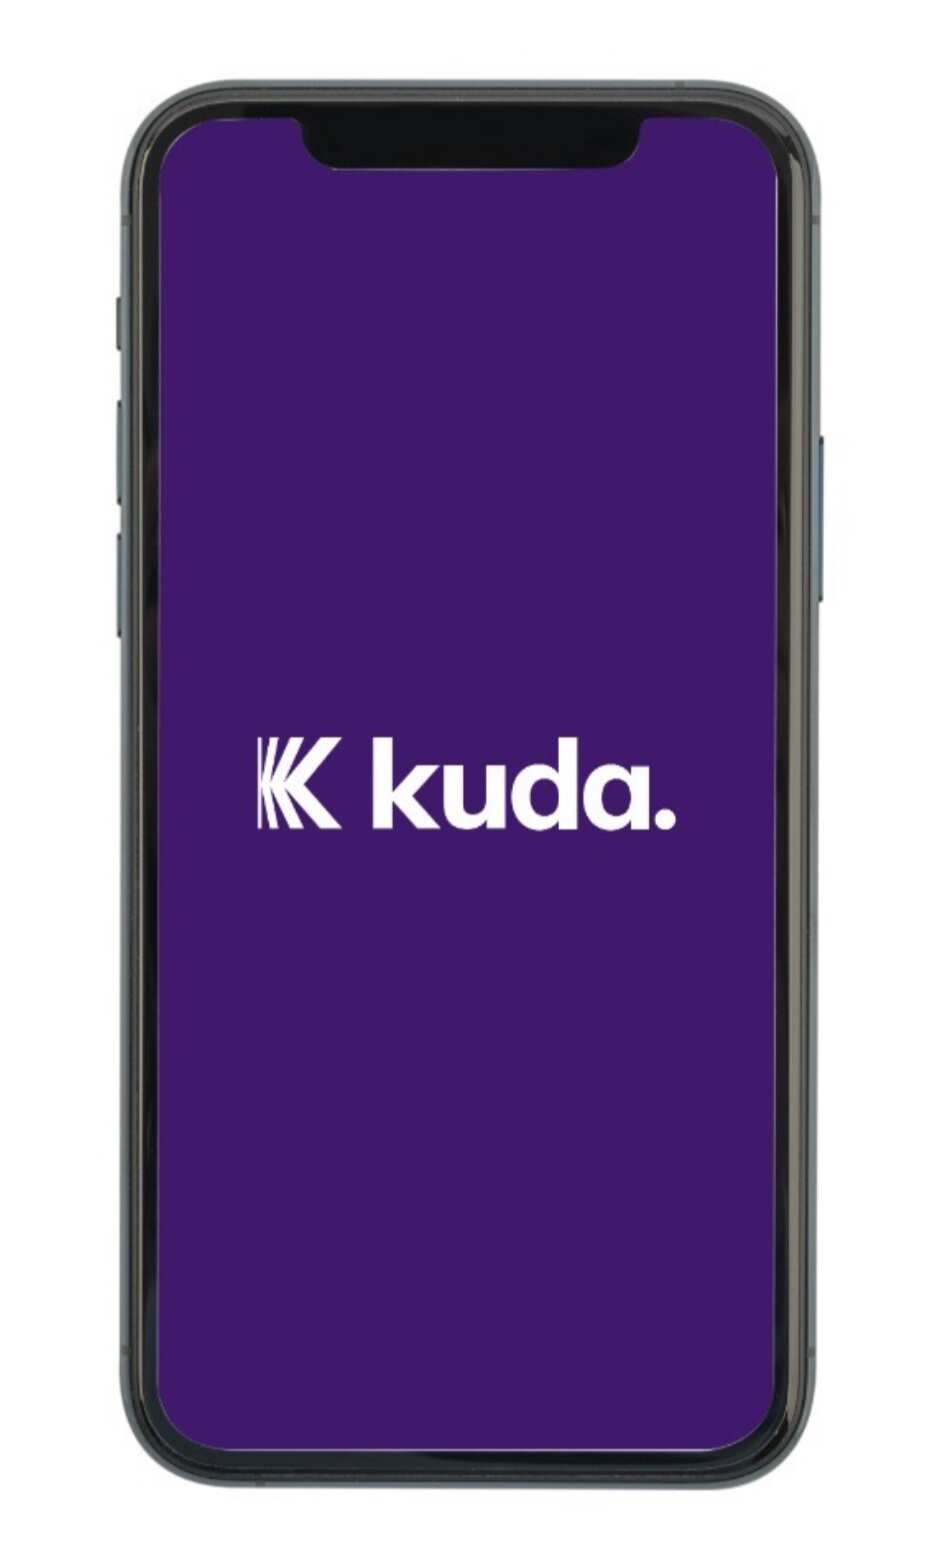 Kuda’s Upgraded App with New Features Consistent with Improving Customer Experience